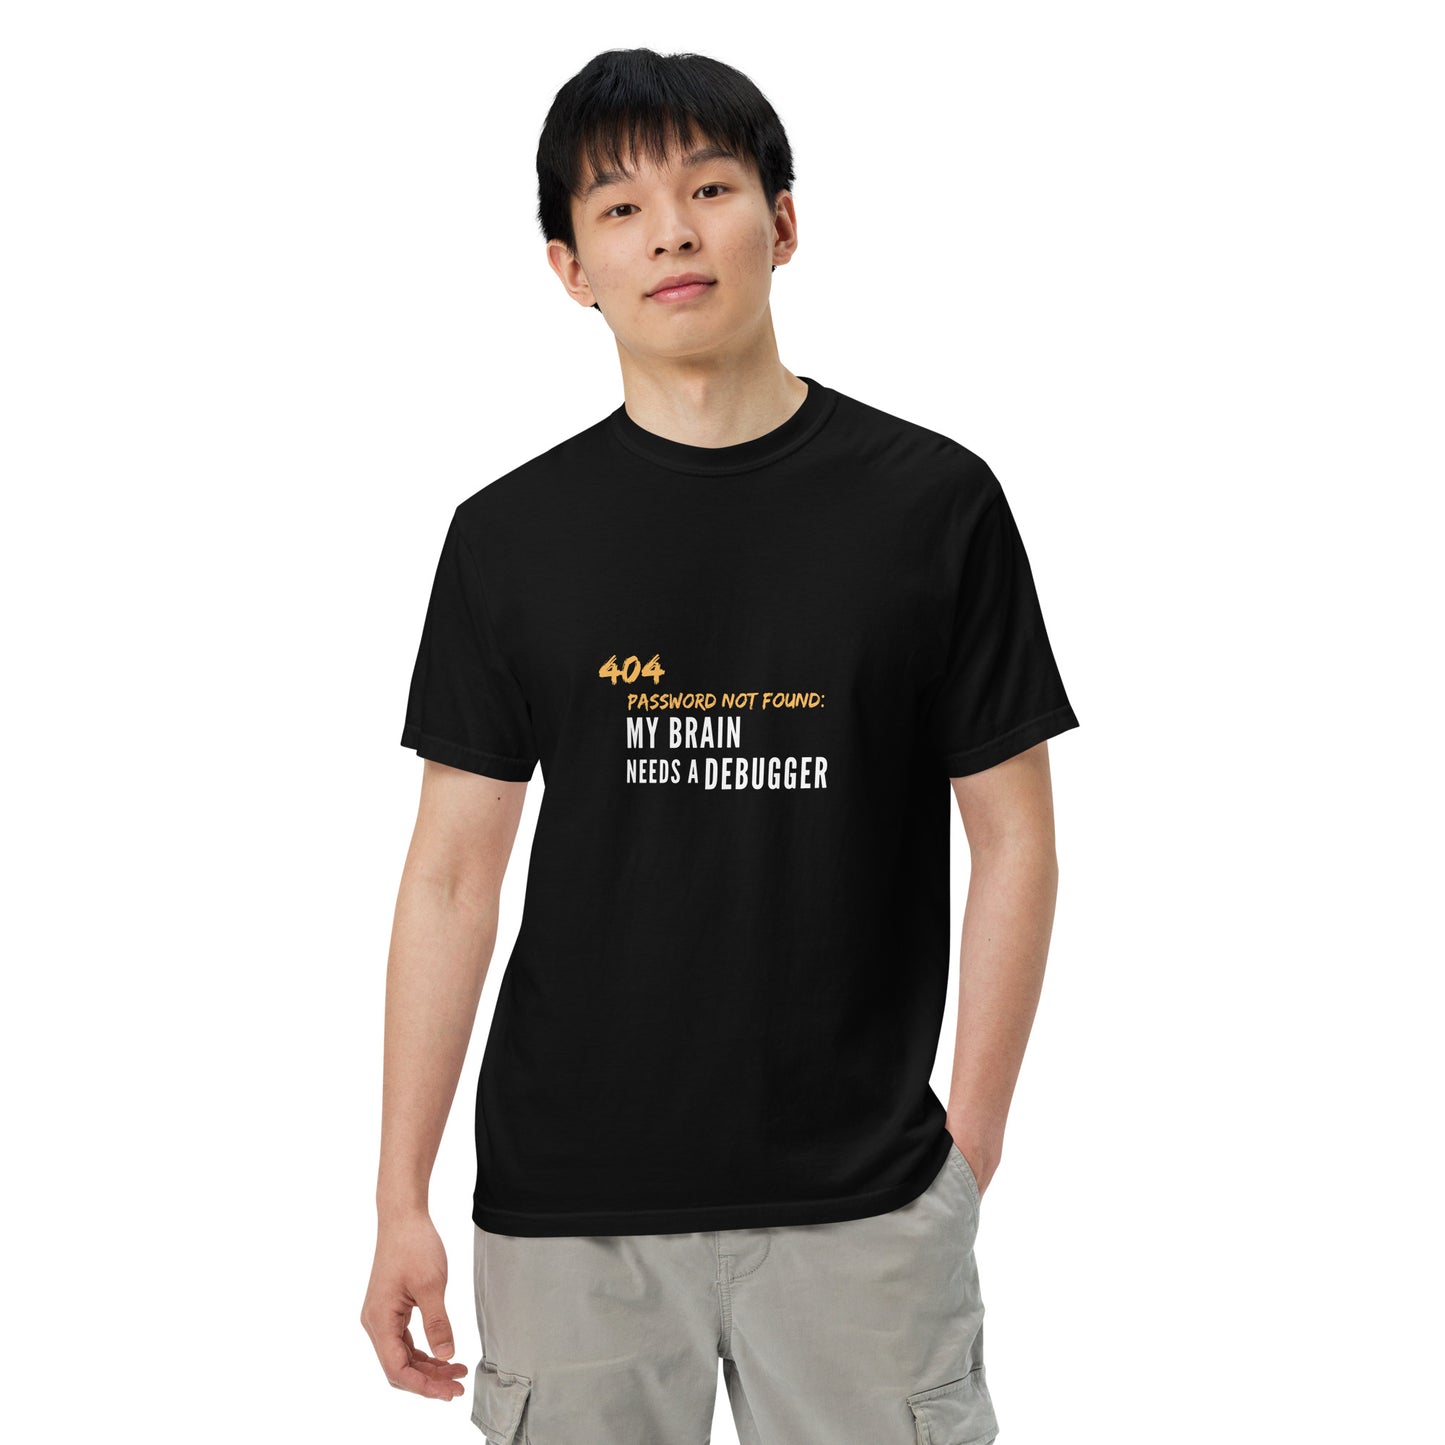 Cyber Security 404 Password Not Found T-Shirt